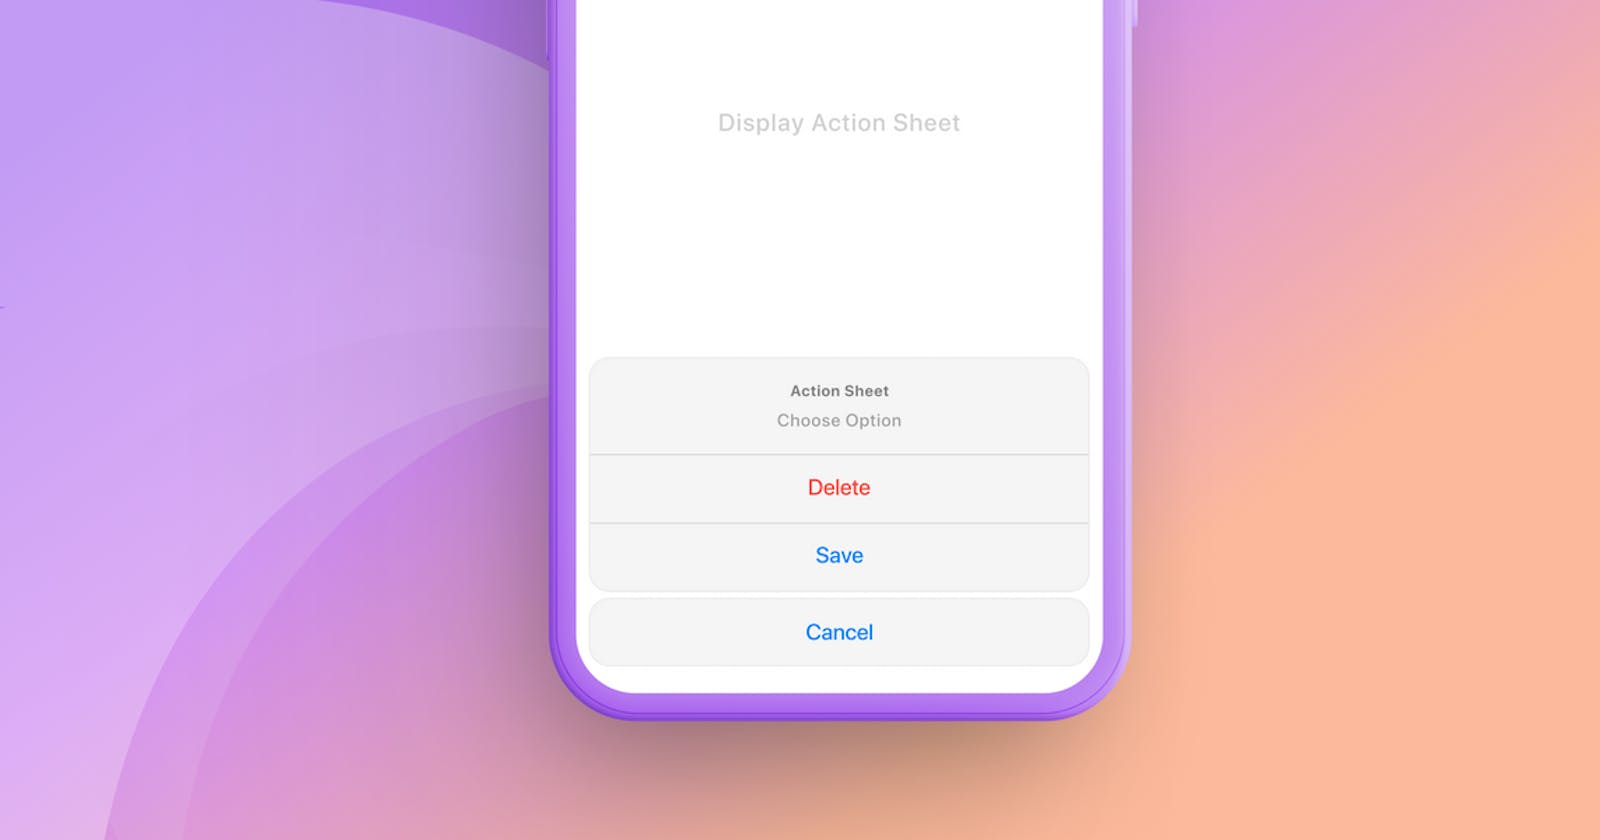 Action Sheets in SwiftUI